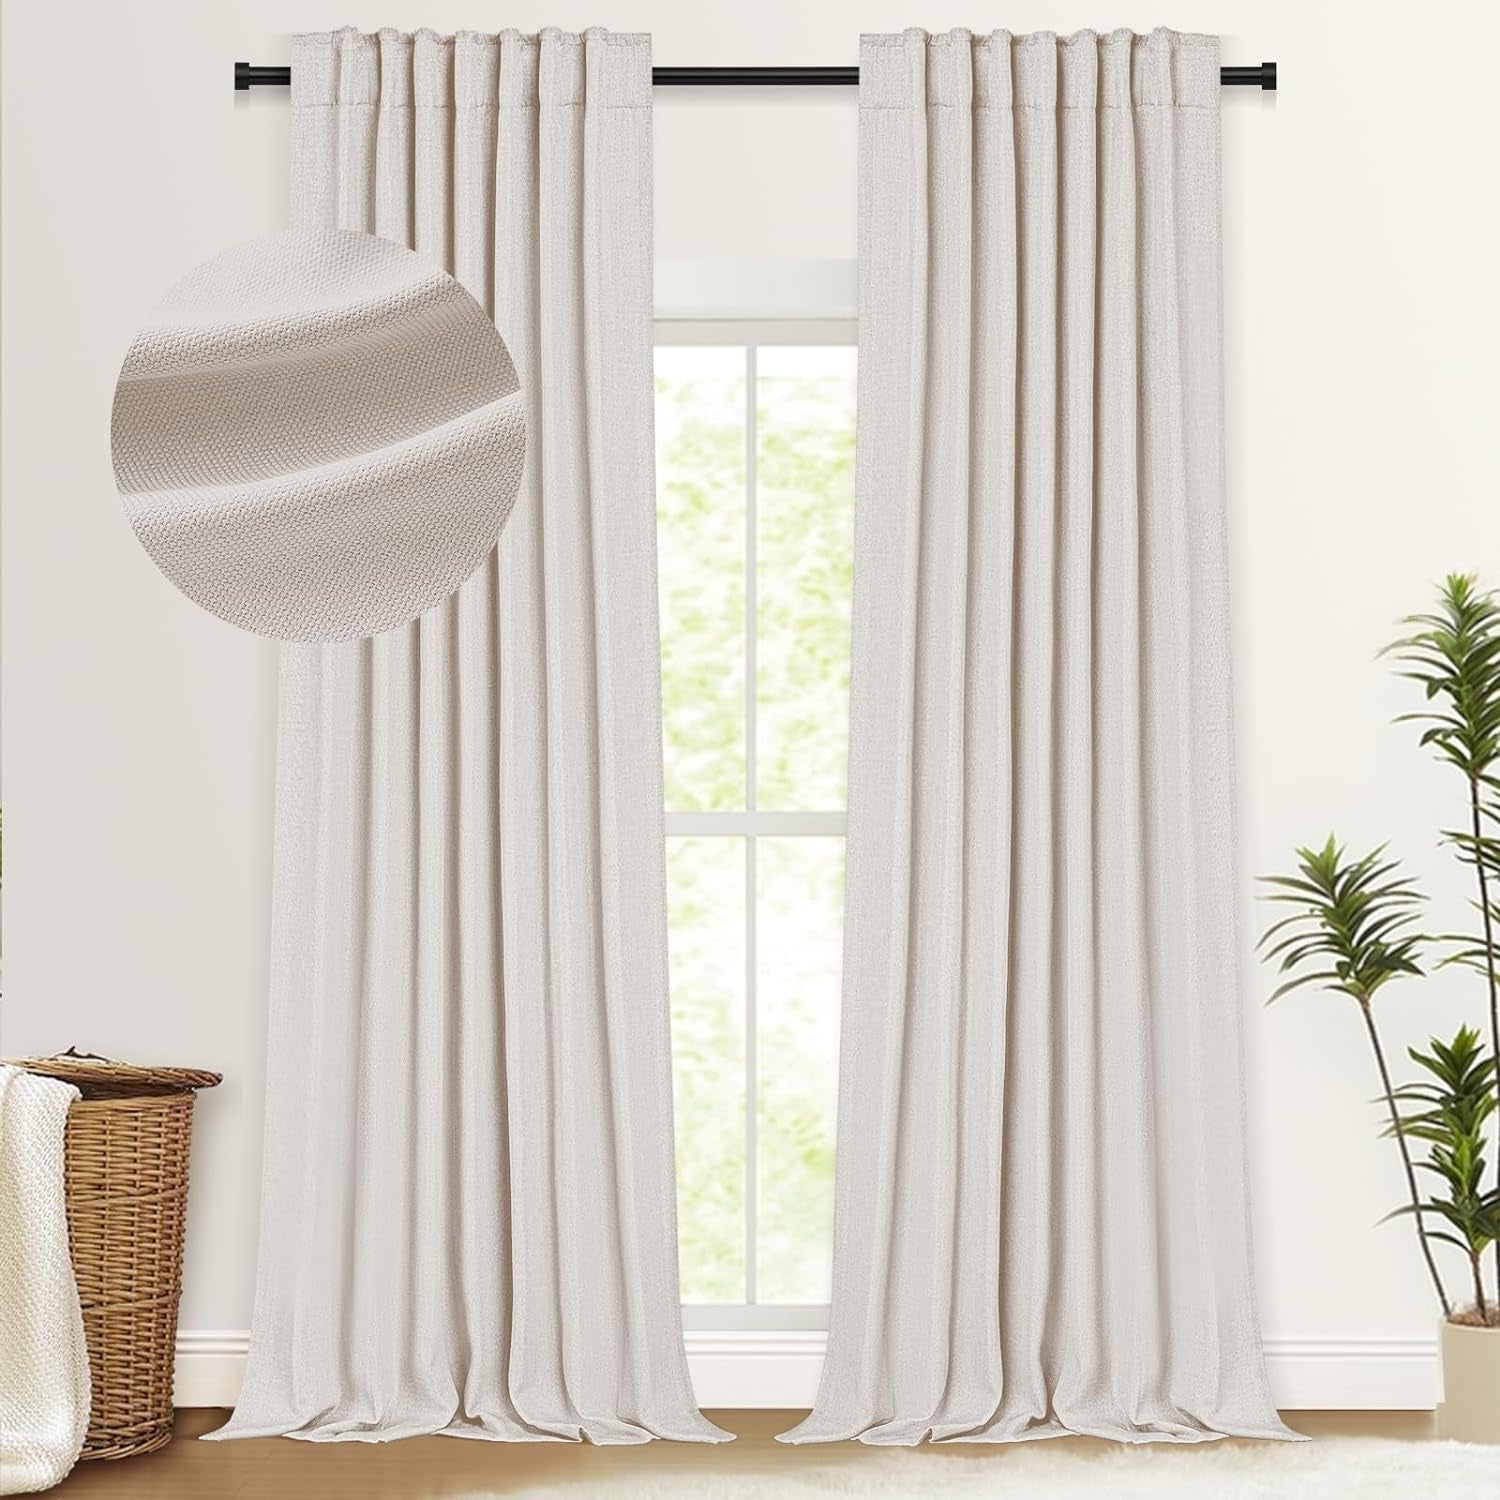 100% Blackout Shield Faux Linen Blackout Curtains for Bedroom 84 Inch Length 2 Panels Set, Cream Curtains with Back Tab/Rod Pocket, Thermal Insulated Drapes for Living Room, 50" W X 84" L, Cream  100% Blackout Shield Birch 50''W X 84''L 